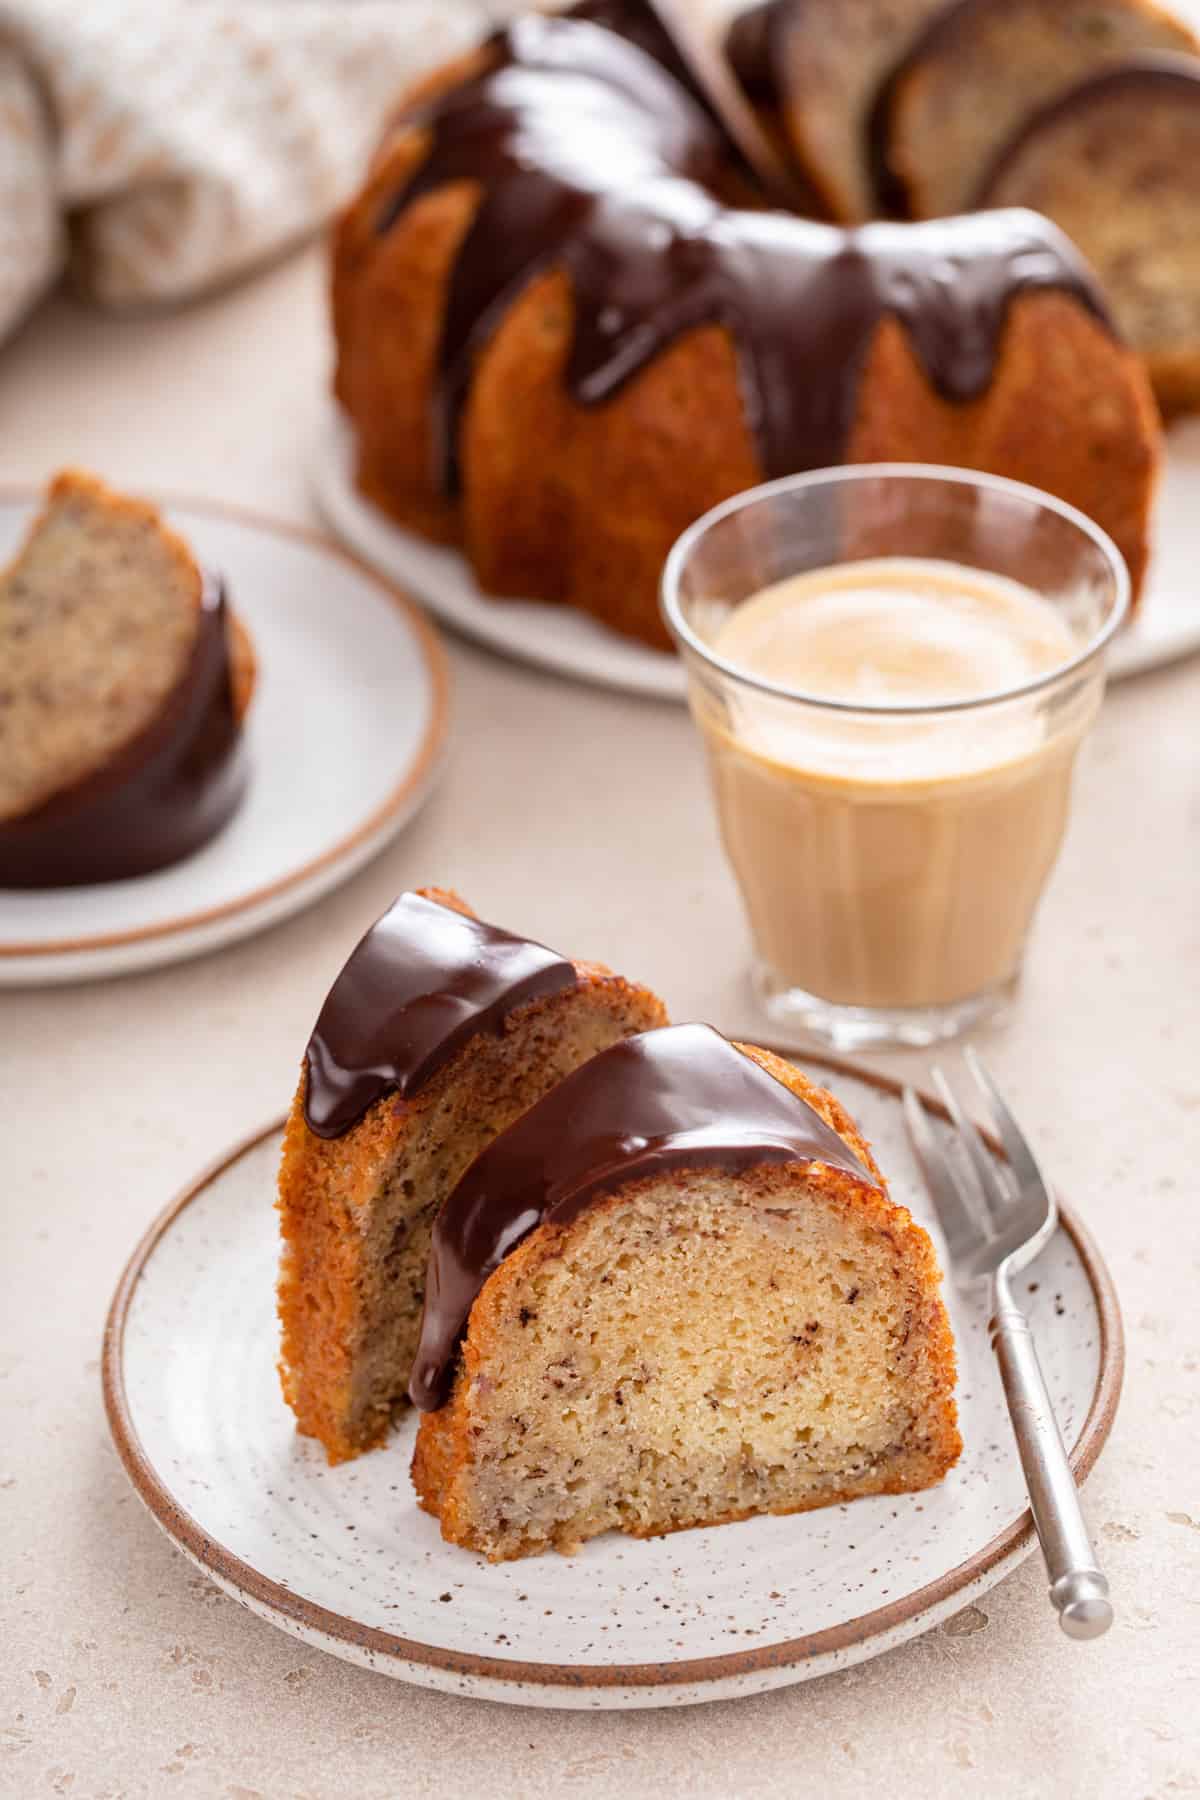 Two ganache-topped slices of banana bundt cake next to a fork on a plate.